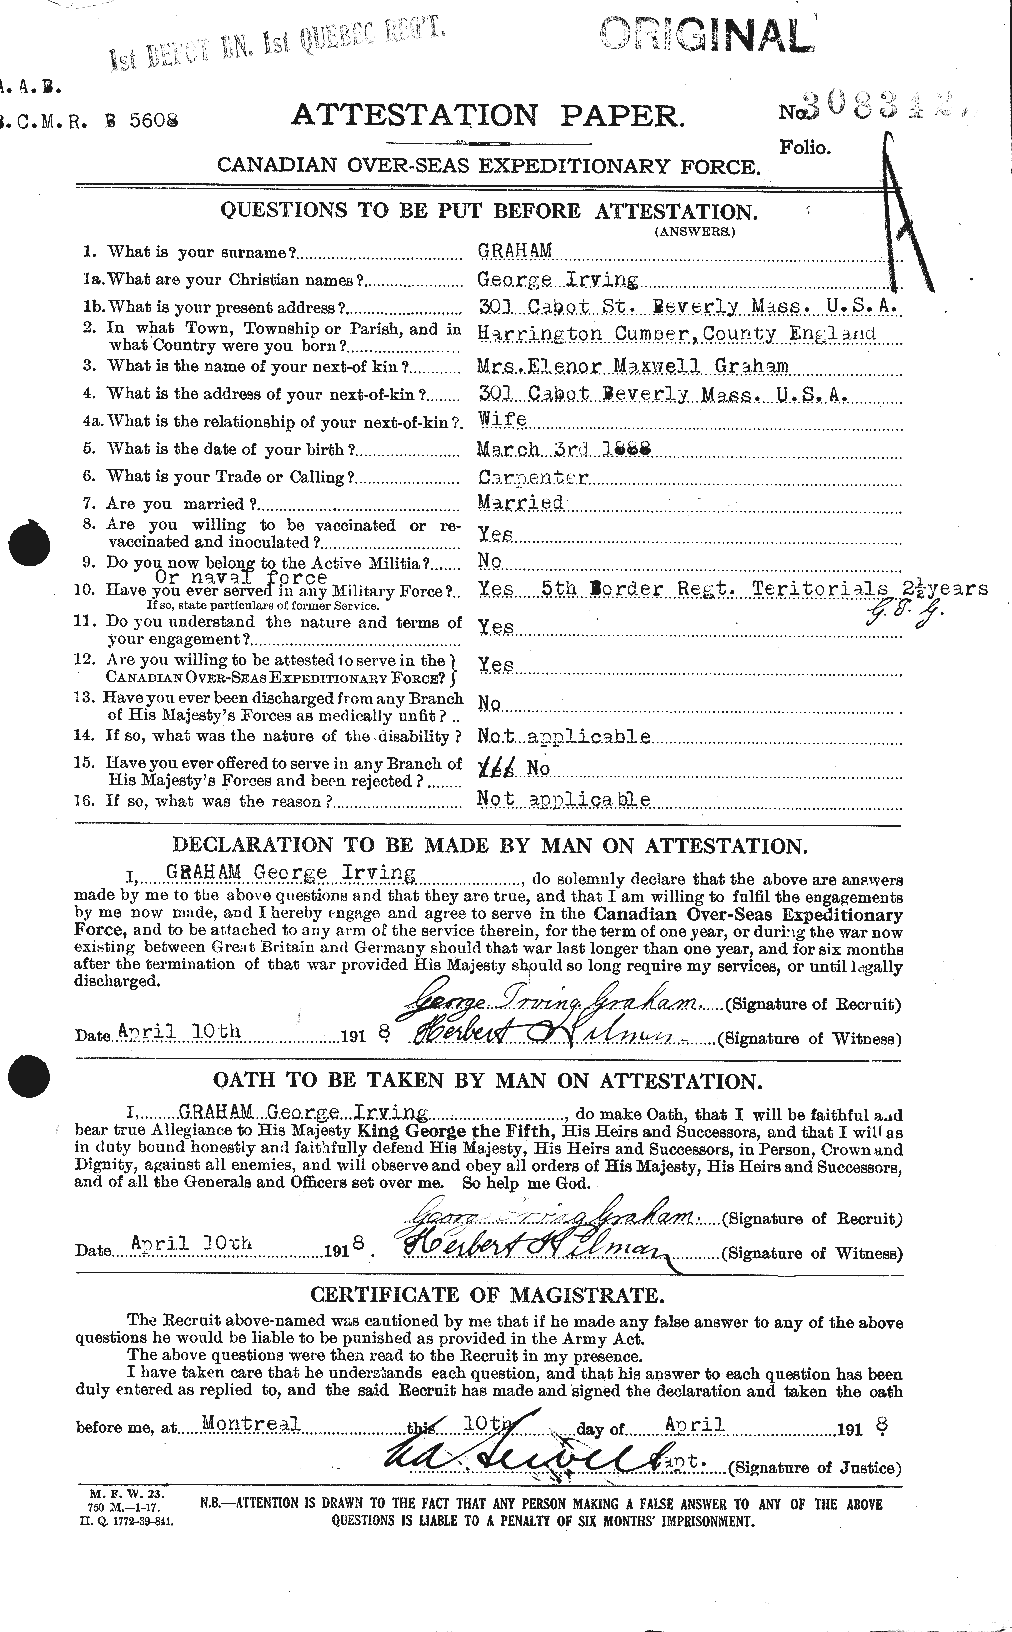 Personnel Records of the First World War - CEF 357666a